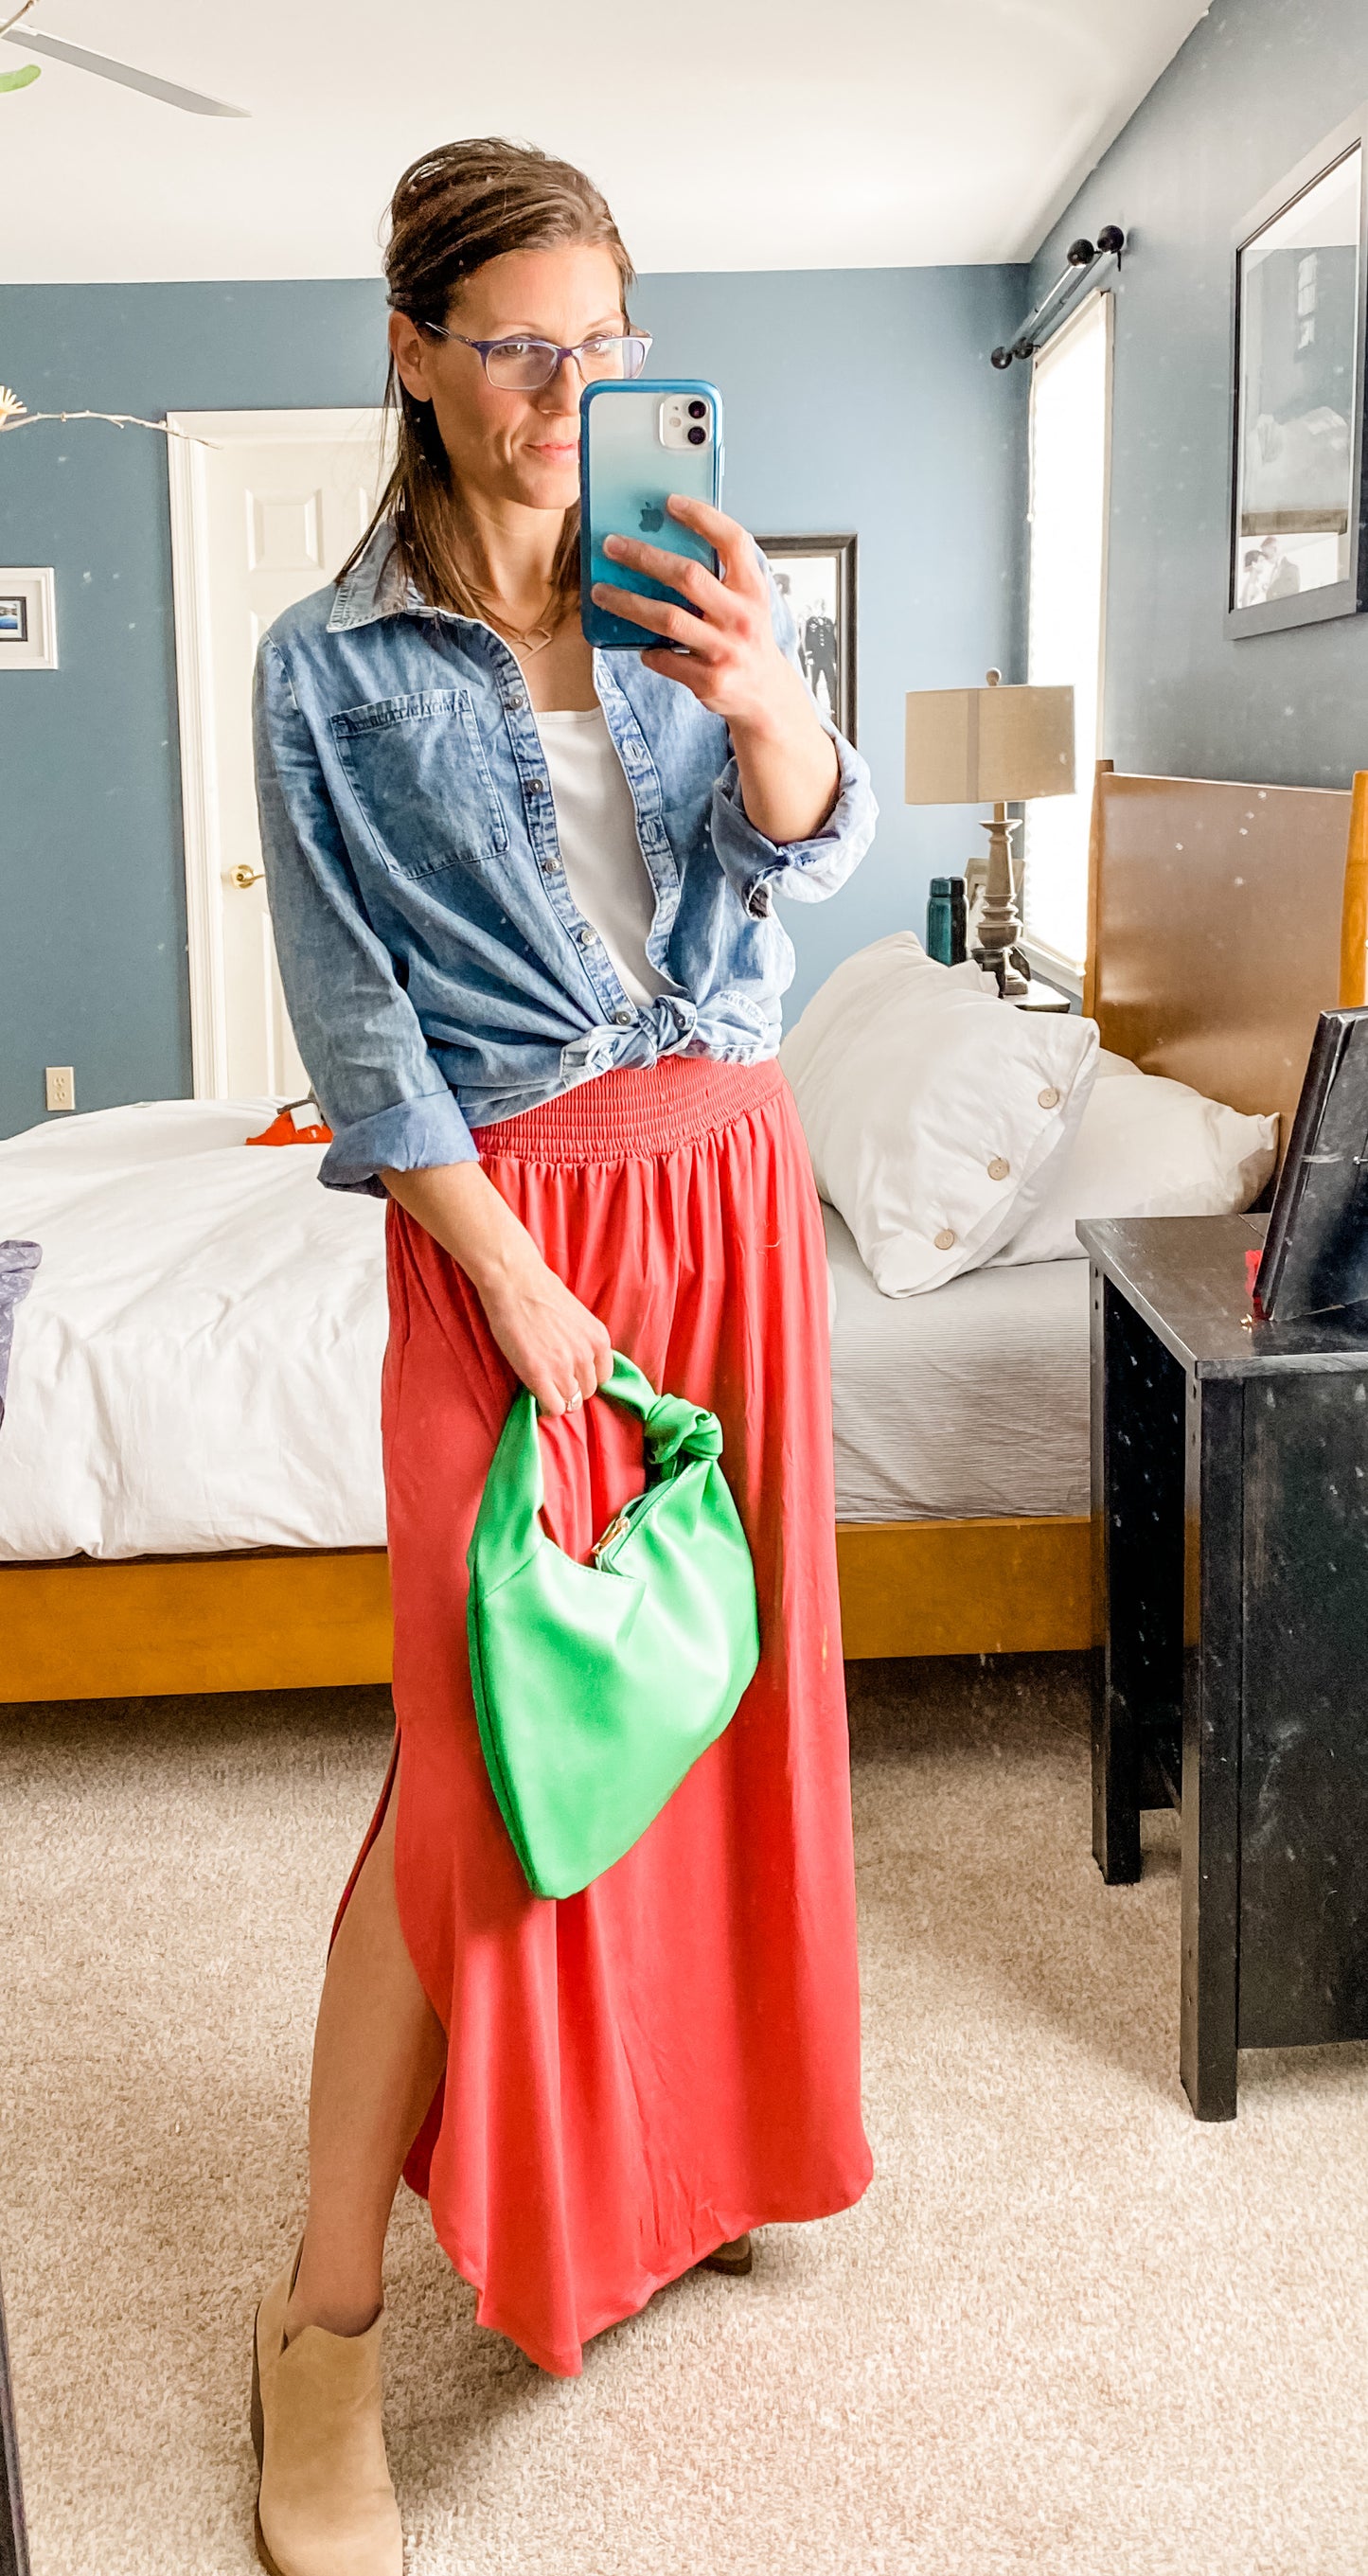 Don't Leave Without Me Skirt in Persimmon